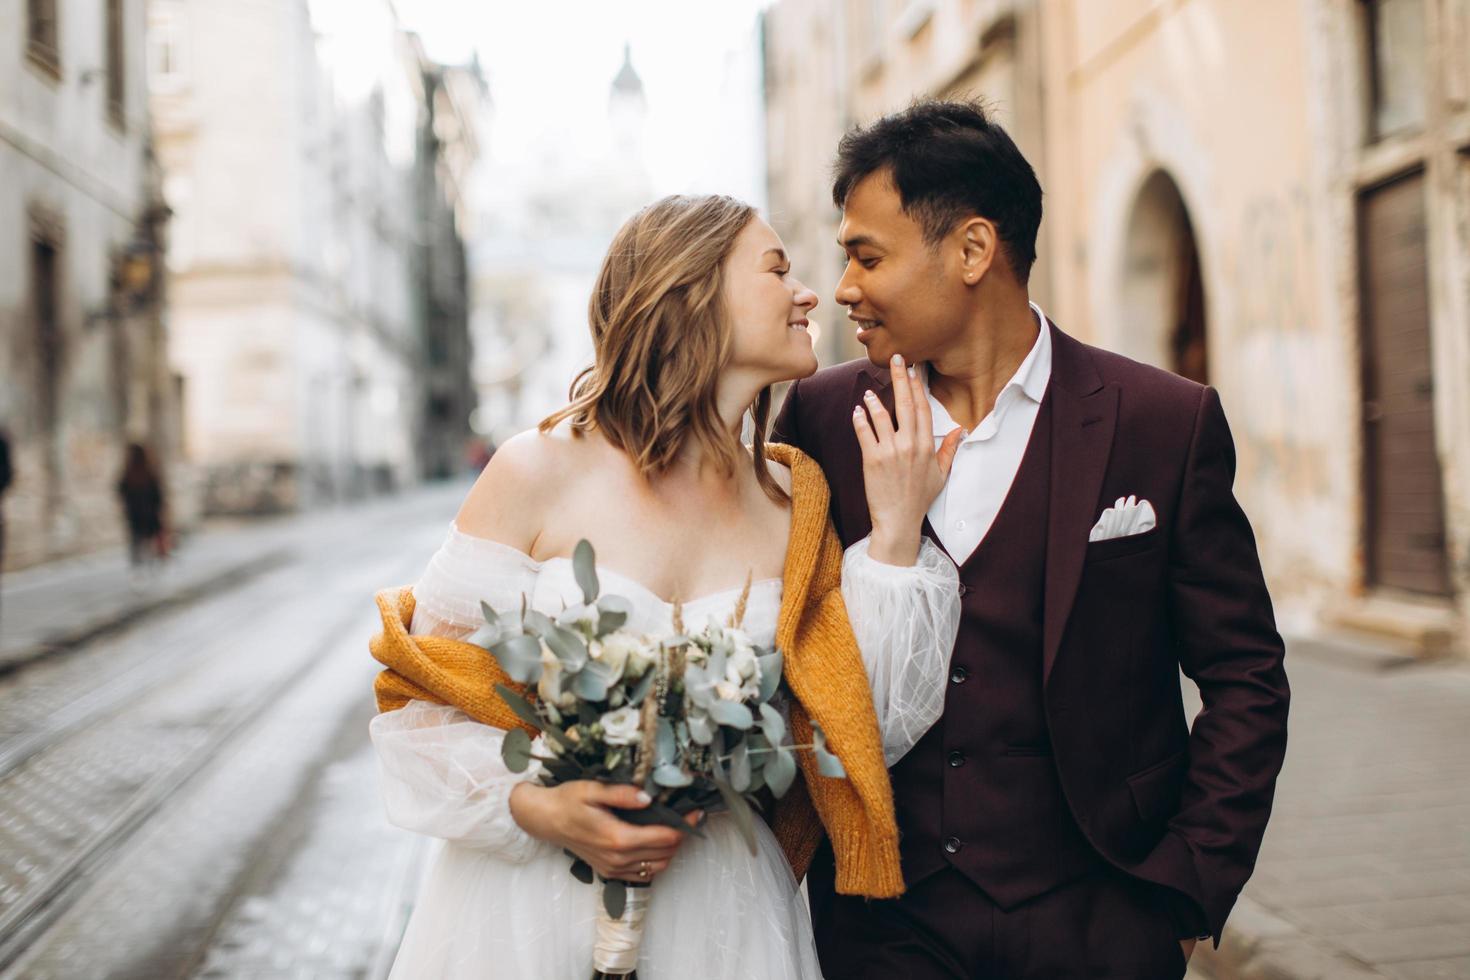 An international wedding couple, a European bride and an Asian groom walk around the city together. photo